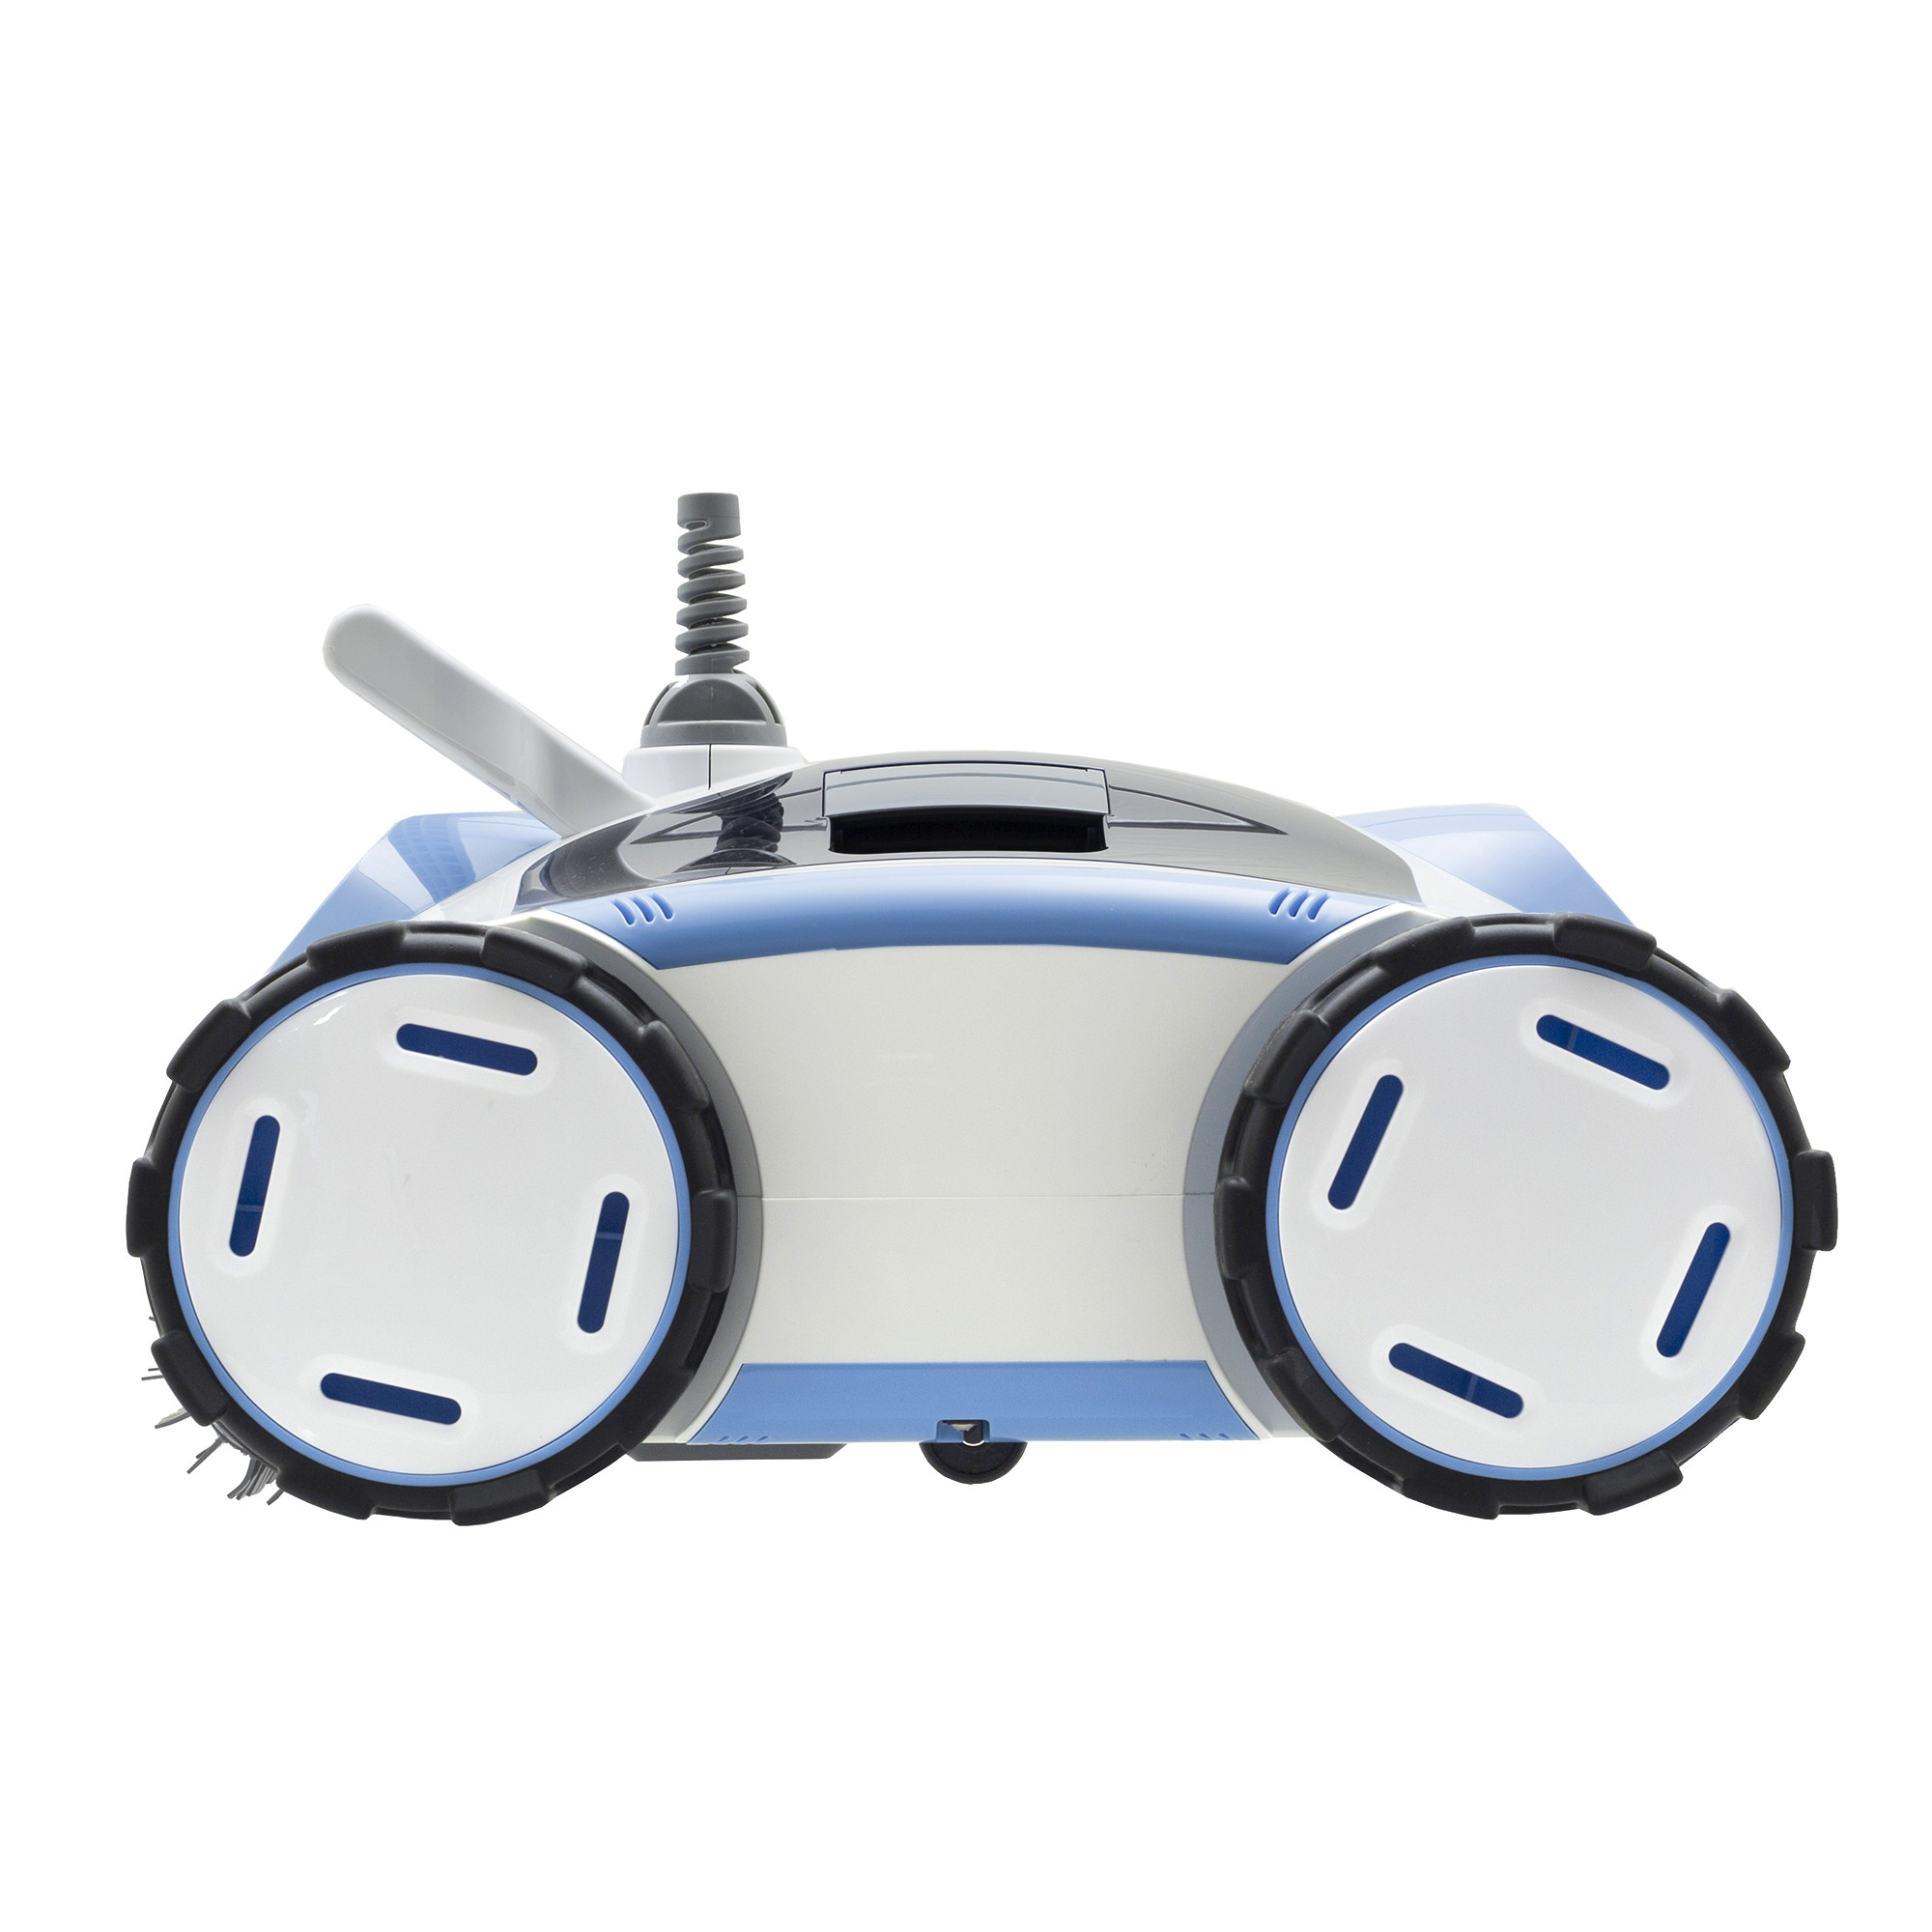 Above Ground Robotic Pool Cleaner
 Aquabot Breeze SE Scrubbing and In Ground Robotic